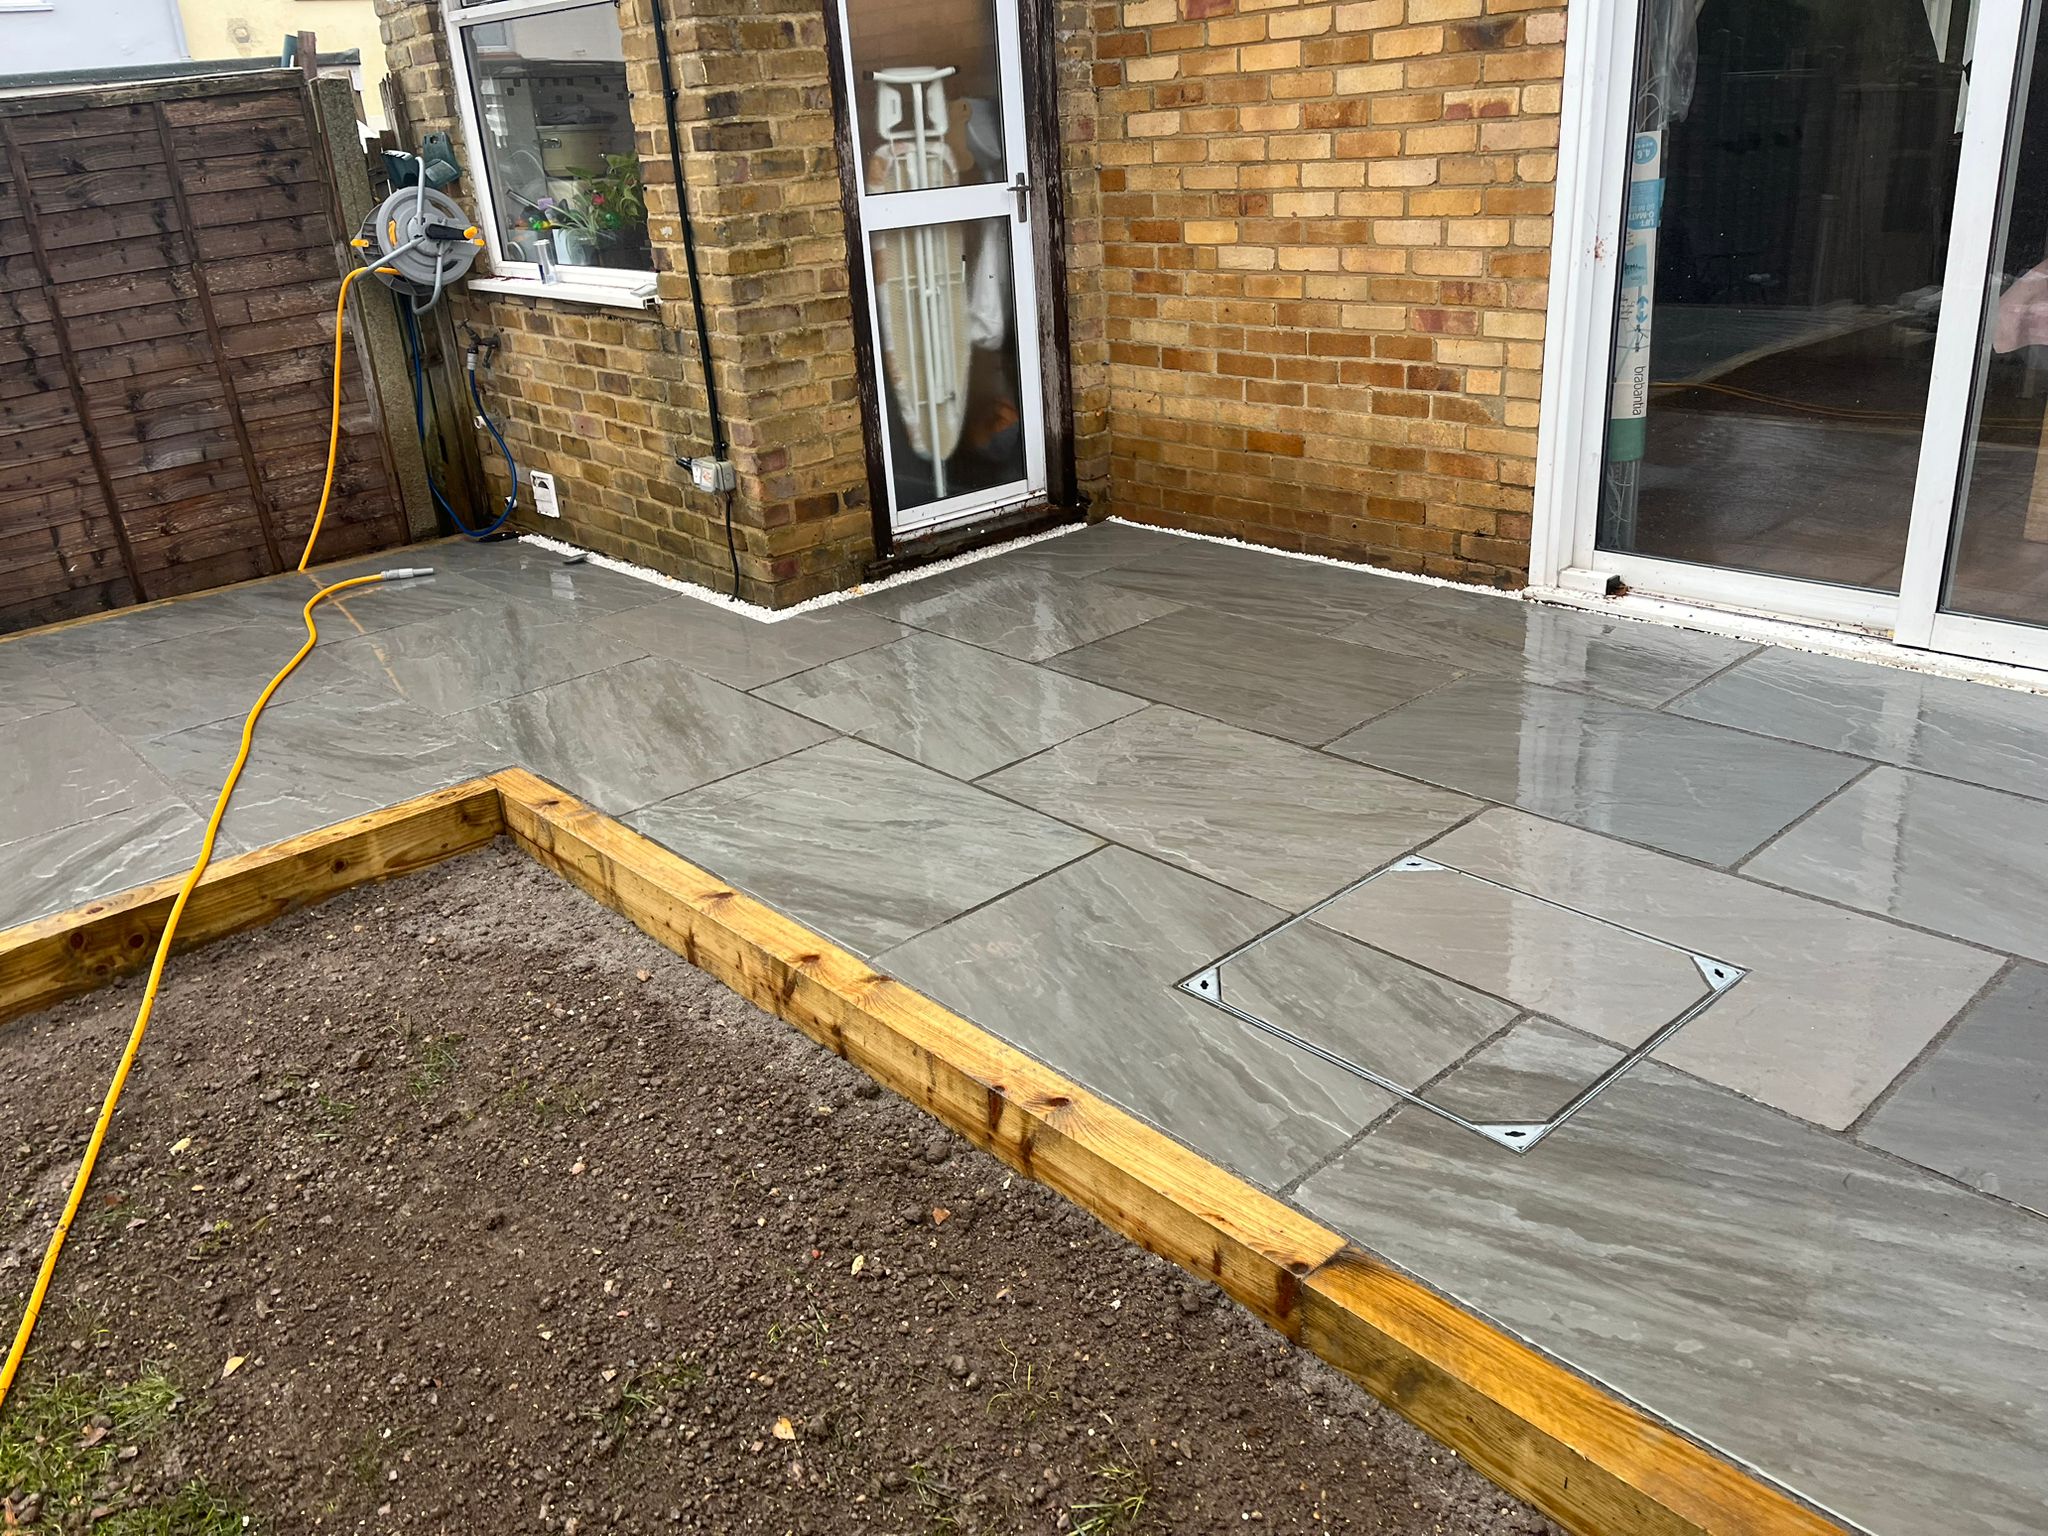 An image showing a newly laid patio in a back garden. Grey shiny slabs with a recessed drain.